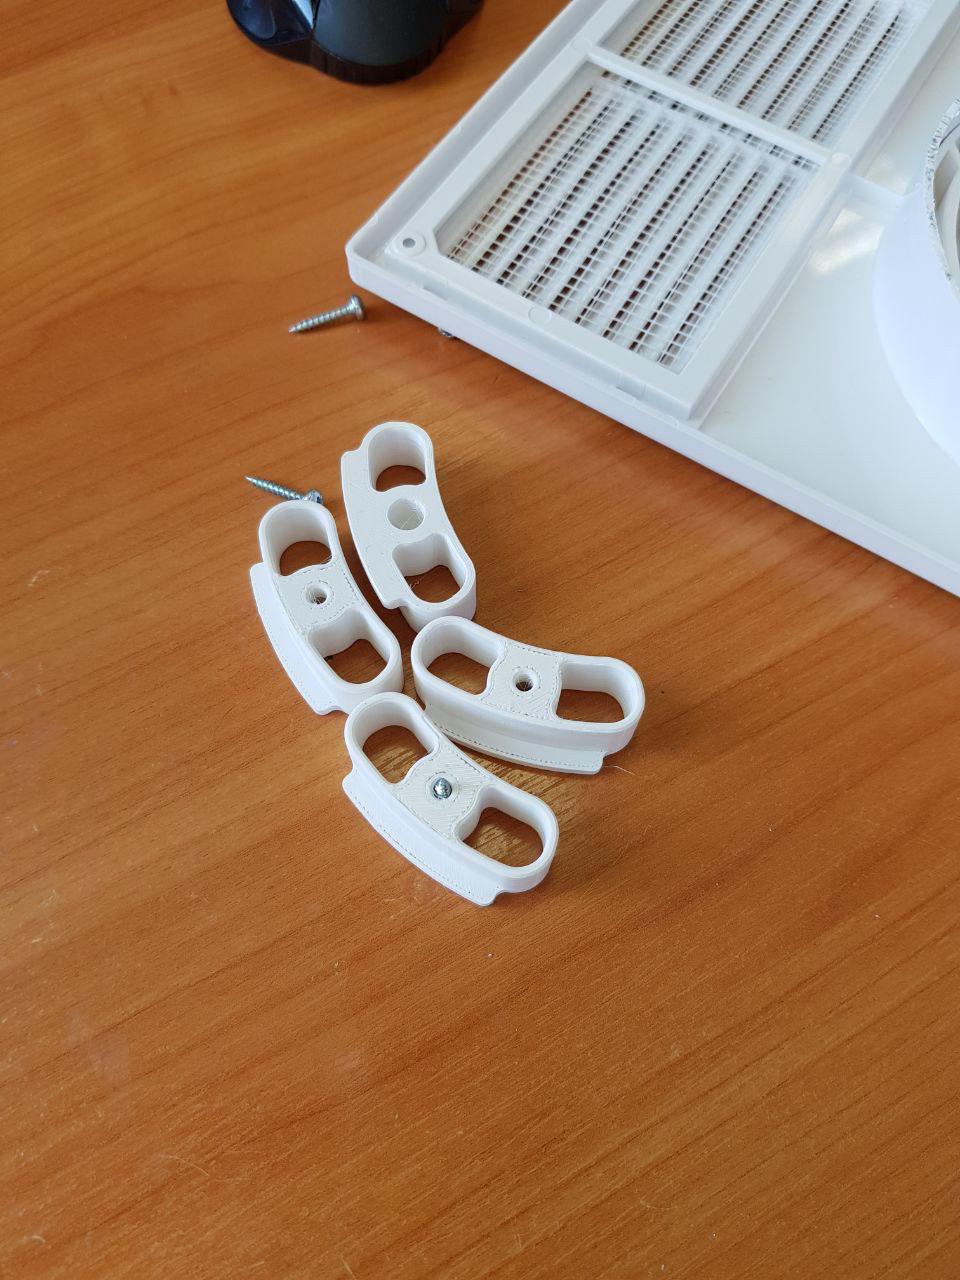 Adapter connector for a blower, printed on 3D printer SkyOne 6